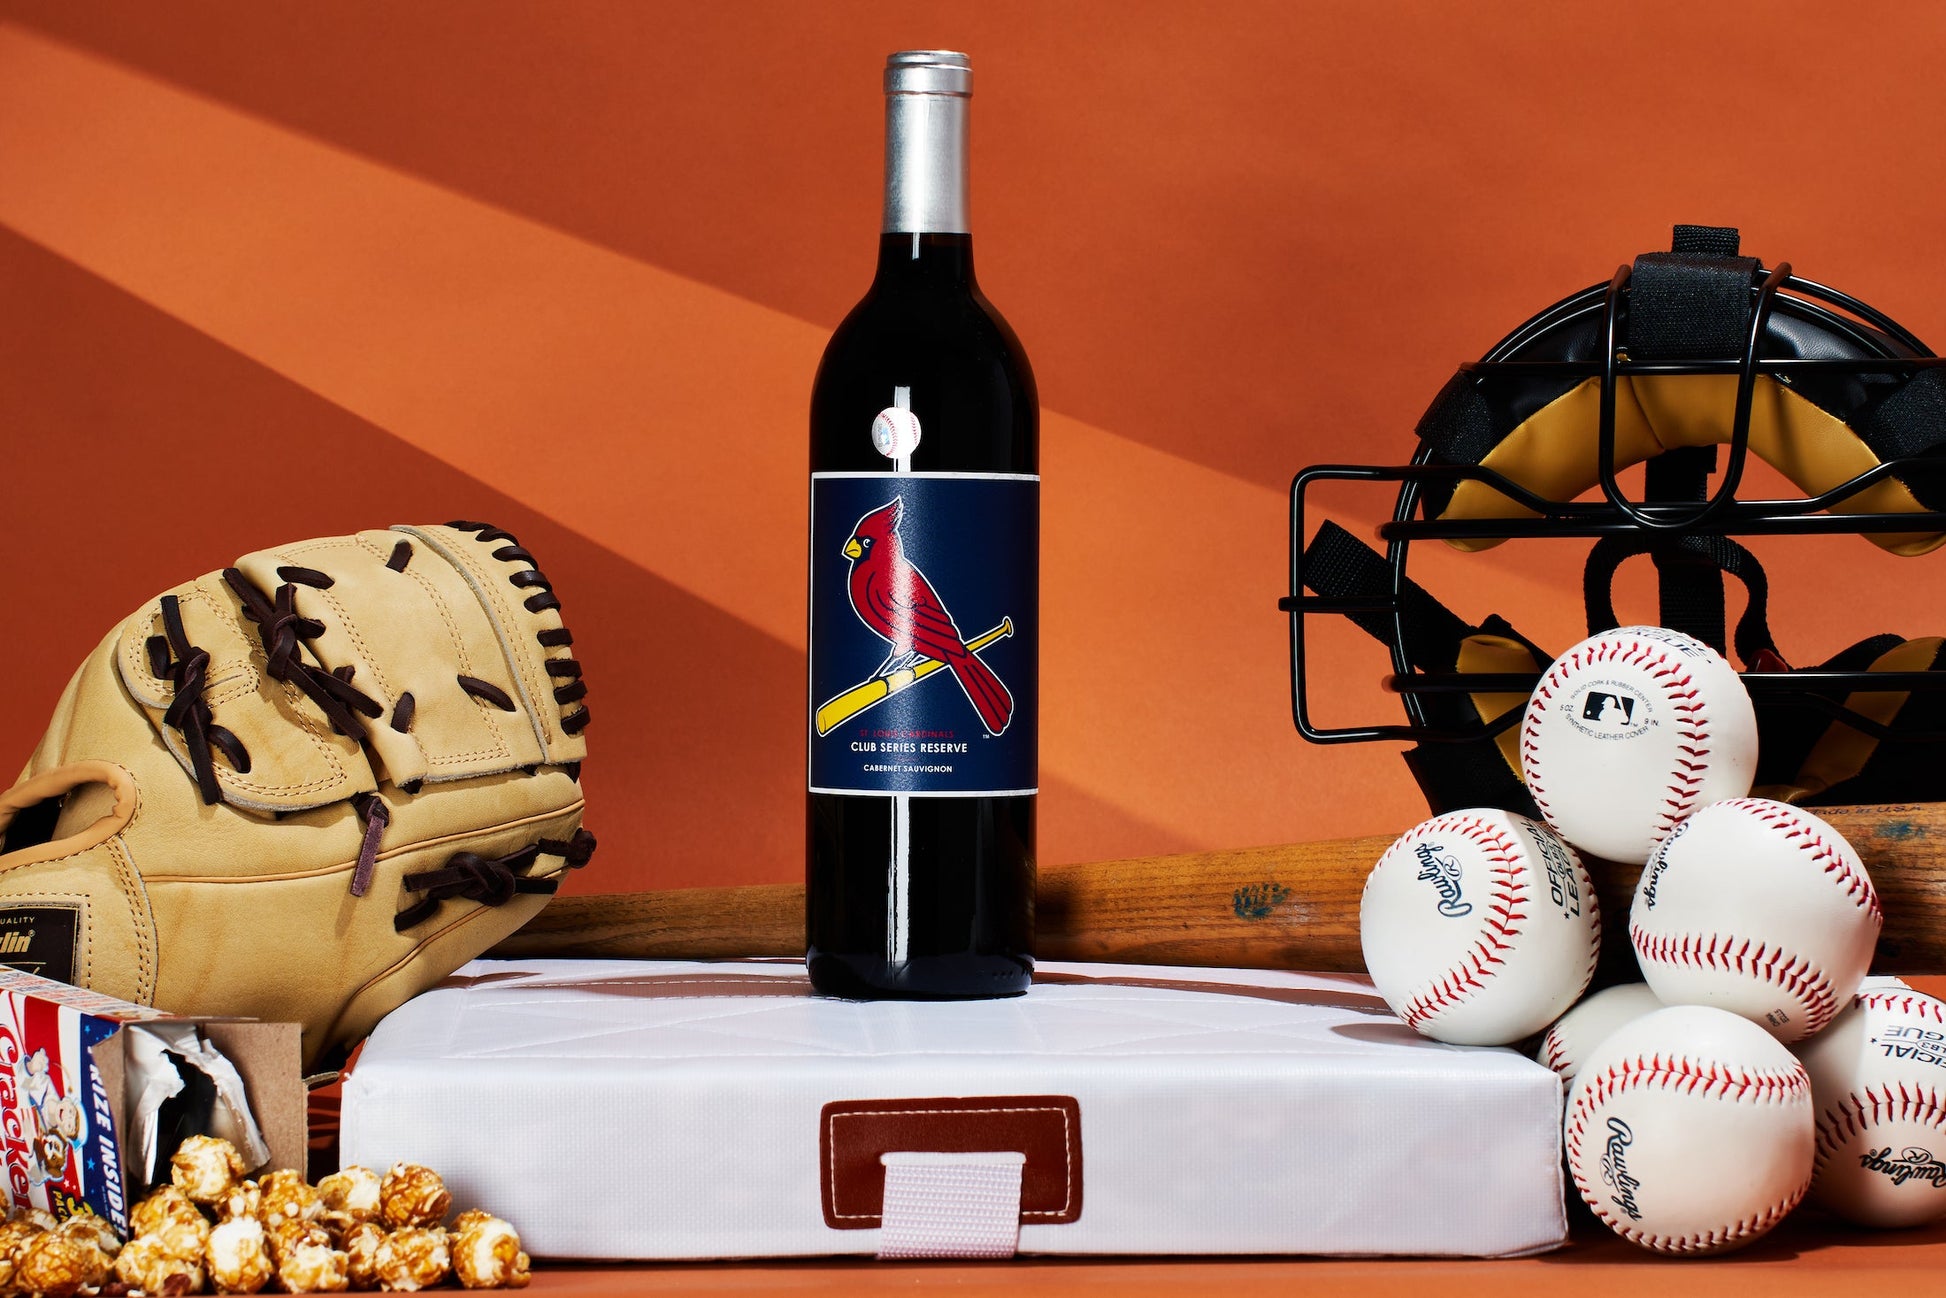 St. Louis Cardinals 4-Pack Wine Gift